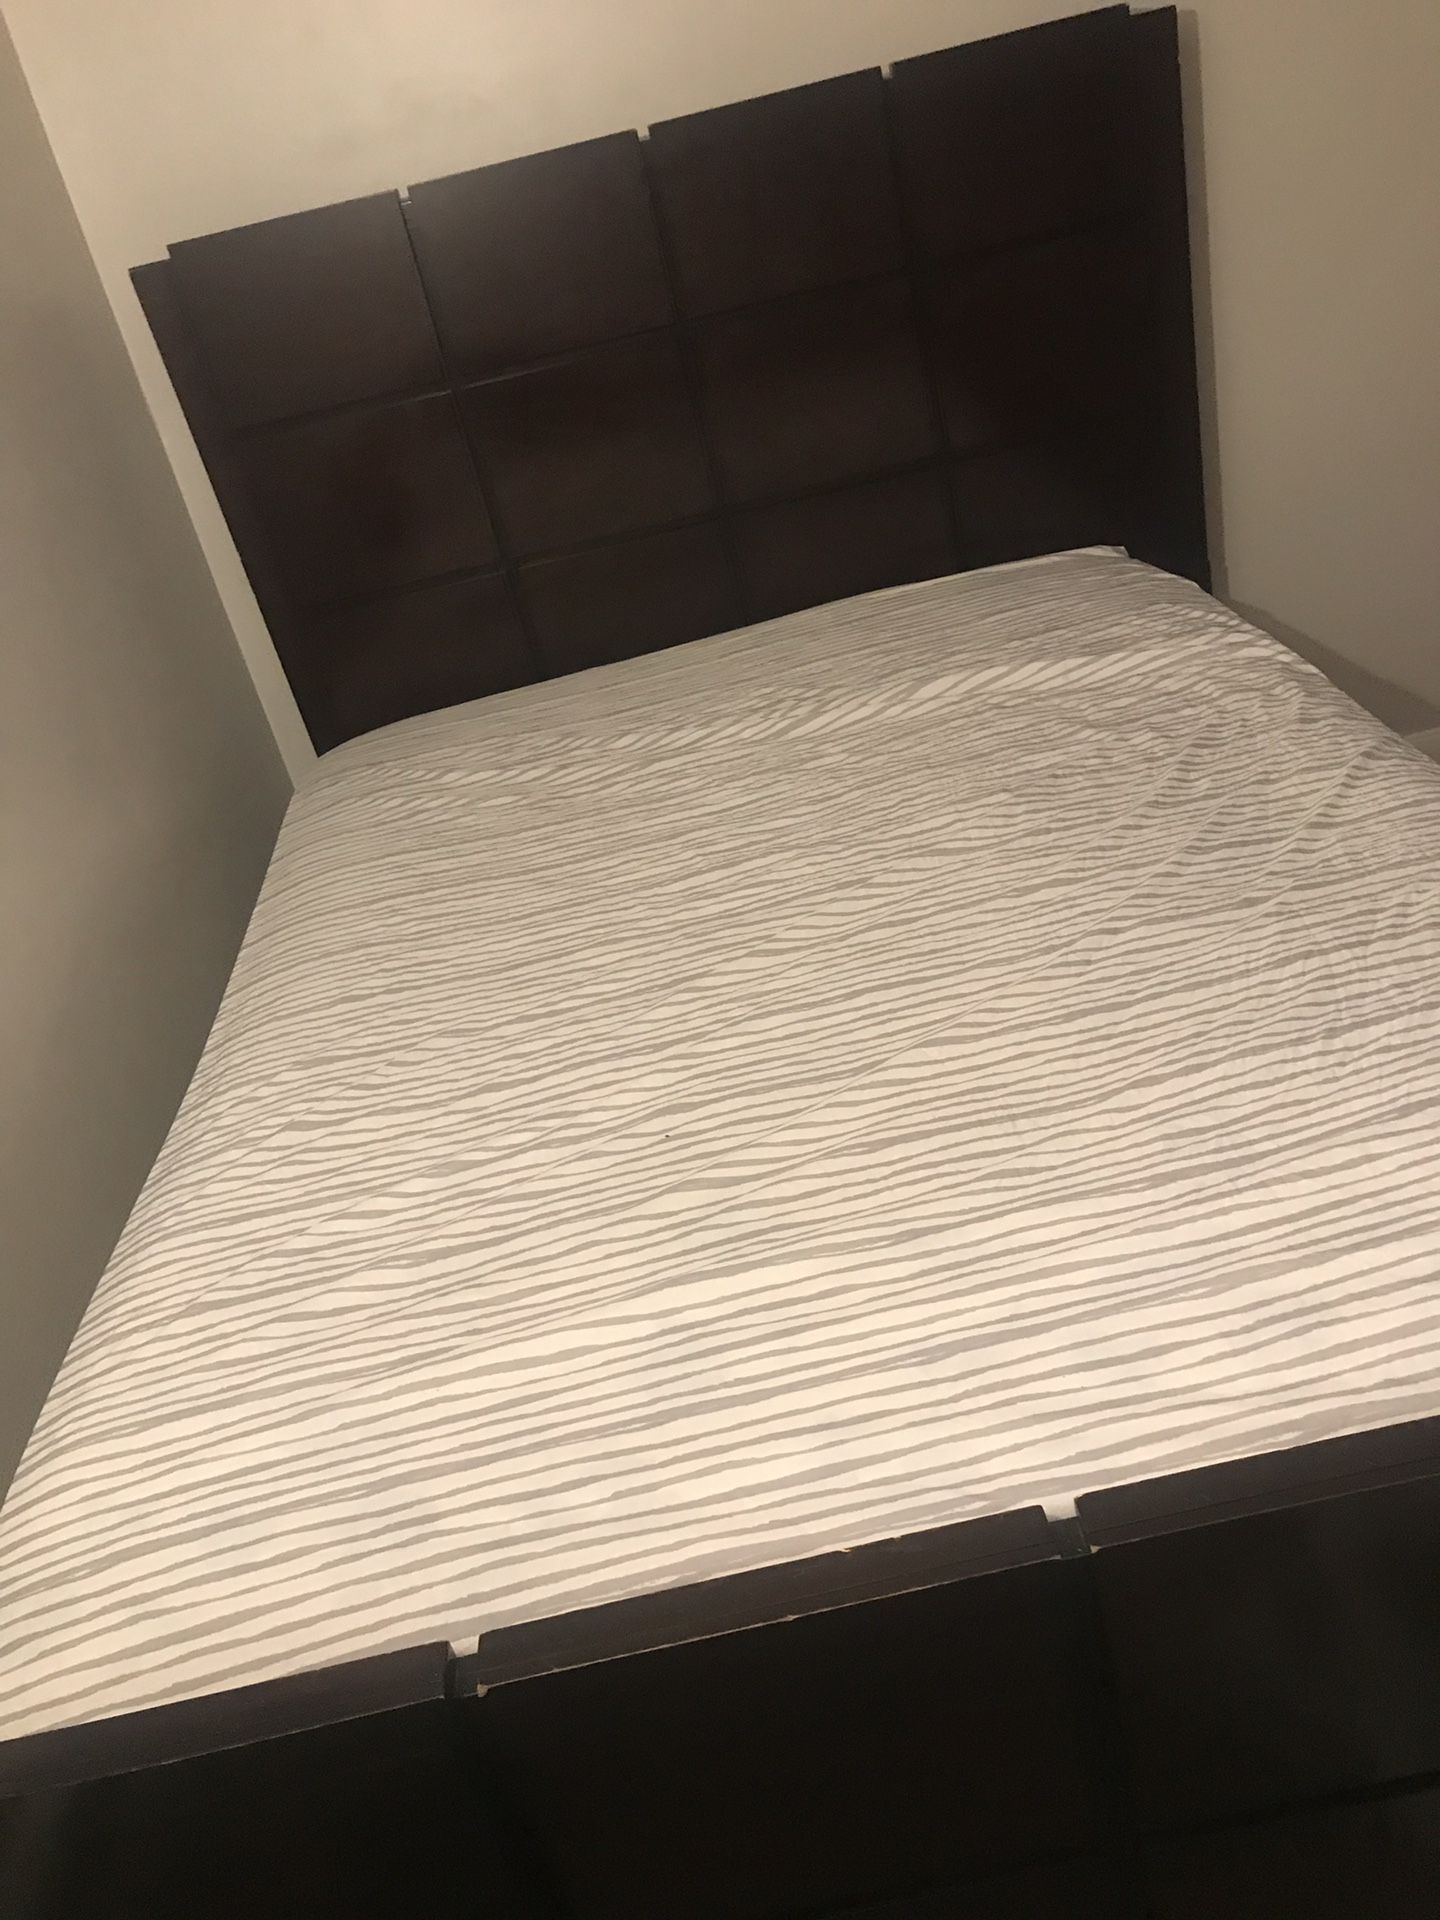 7 Piece Queen Bedroom Set - Mattress and Box Spring Included